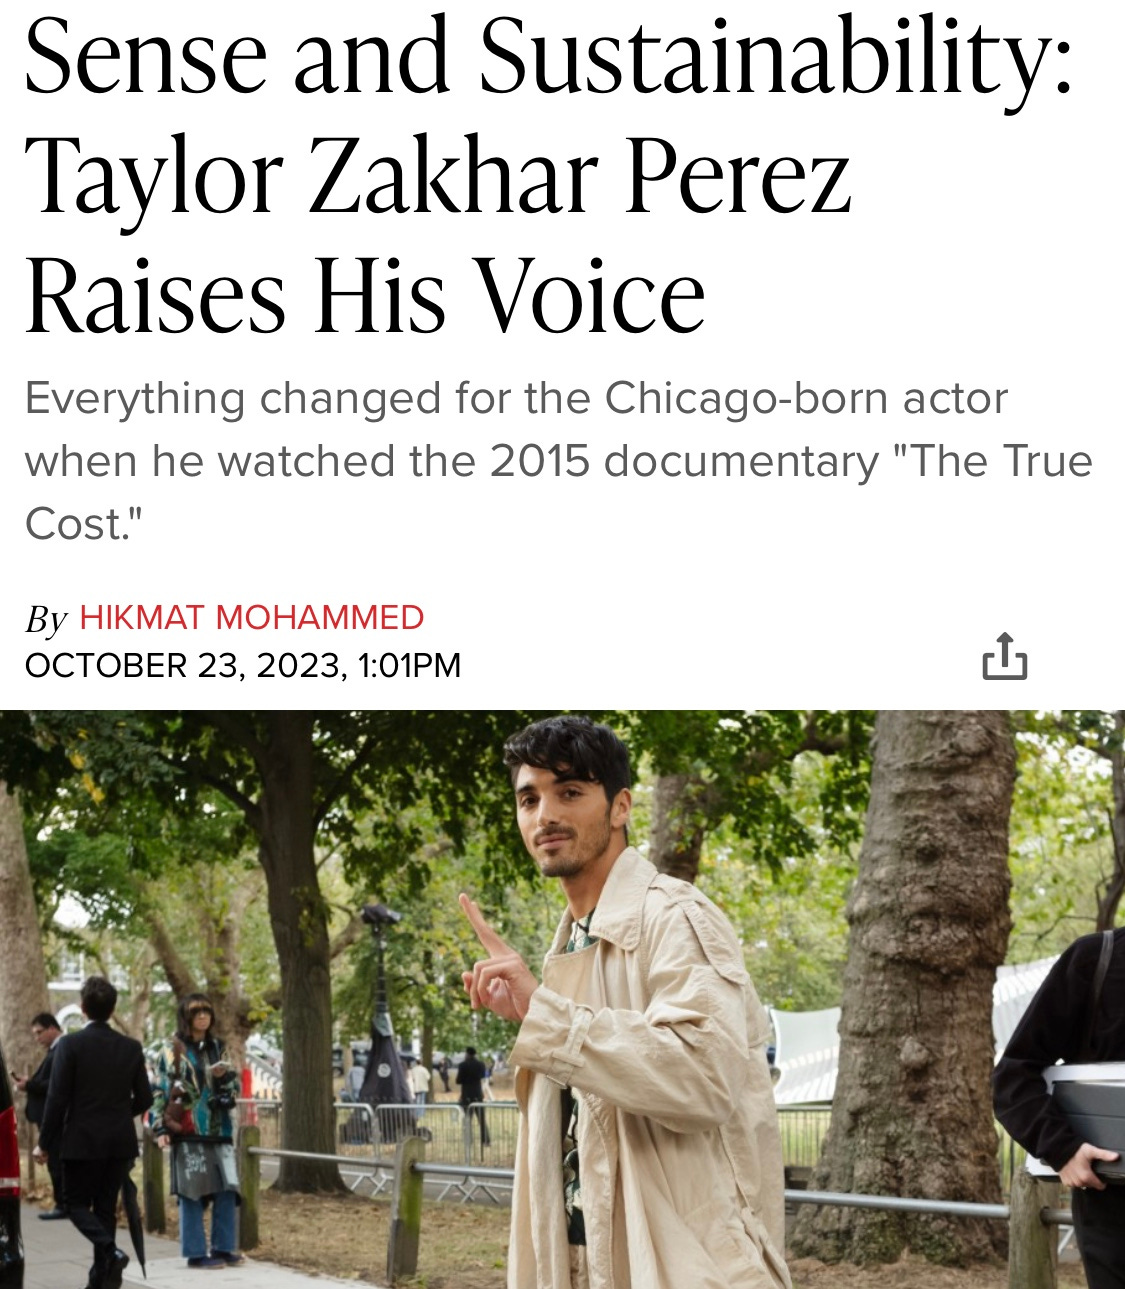 Screenshot of the article about Taylor Zakhar Perez. The headline reads "Sense and Sustainability" and the subtitle says everything changed for him when he watched The True Cost.